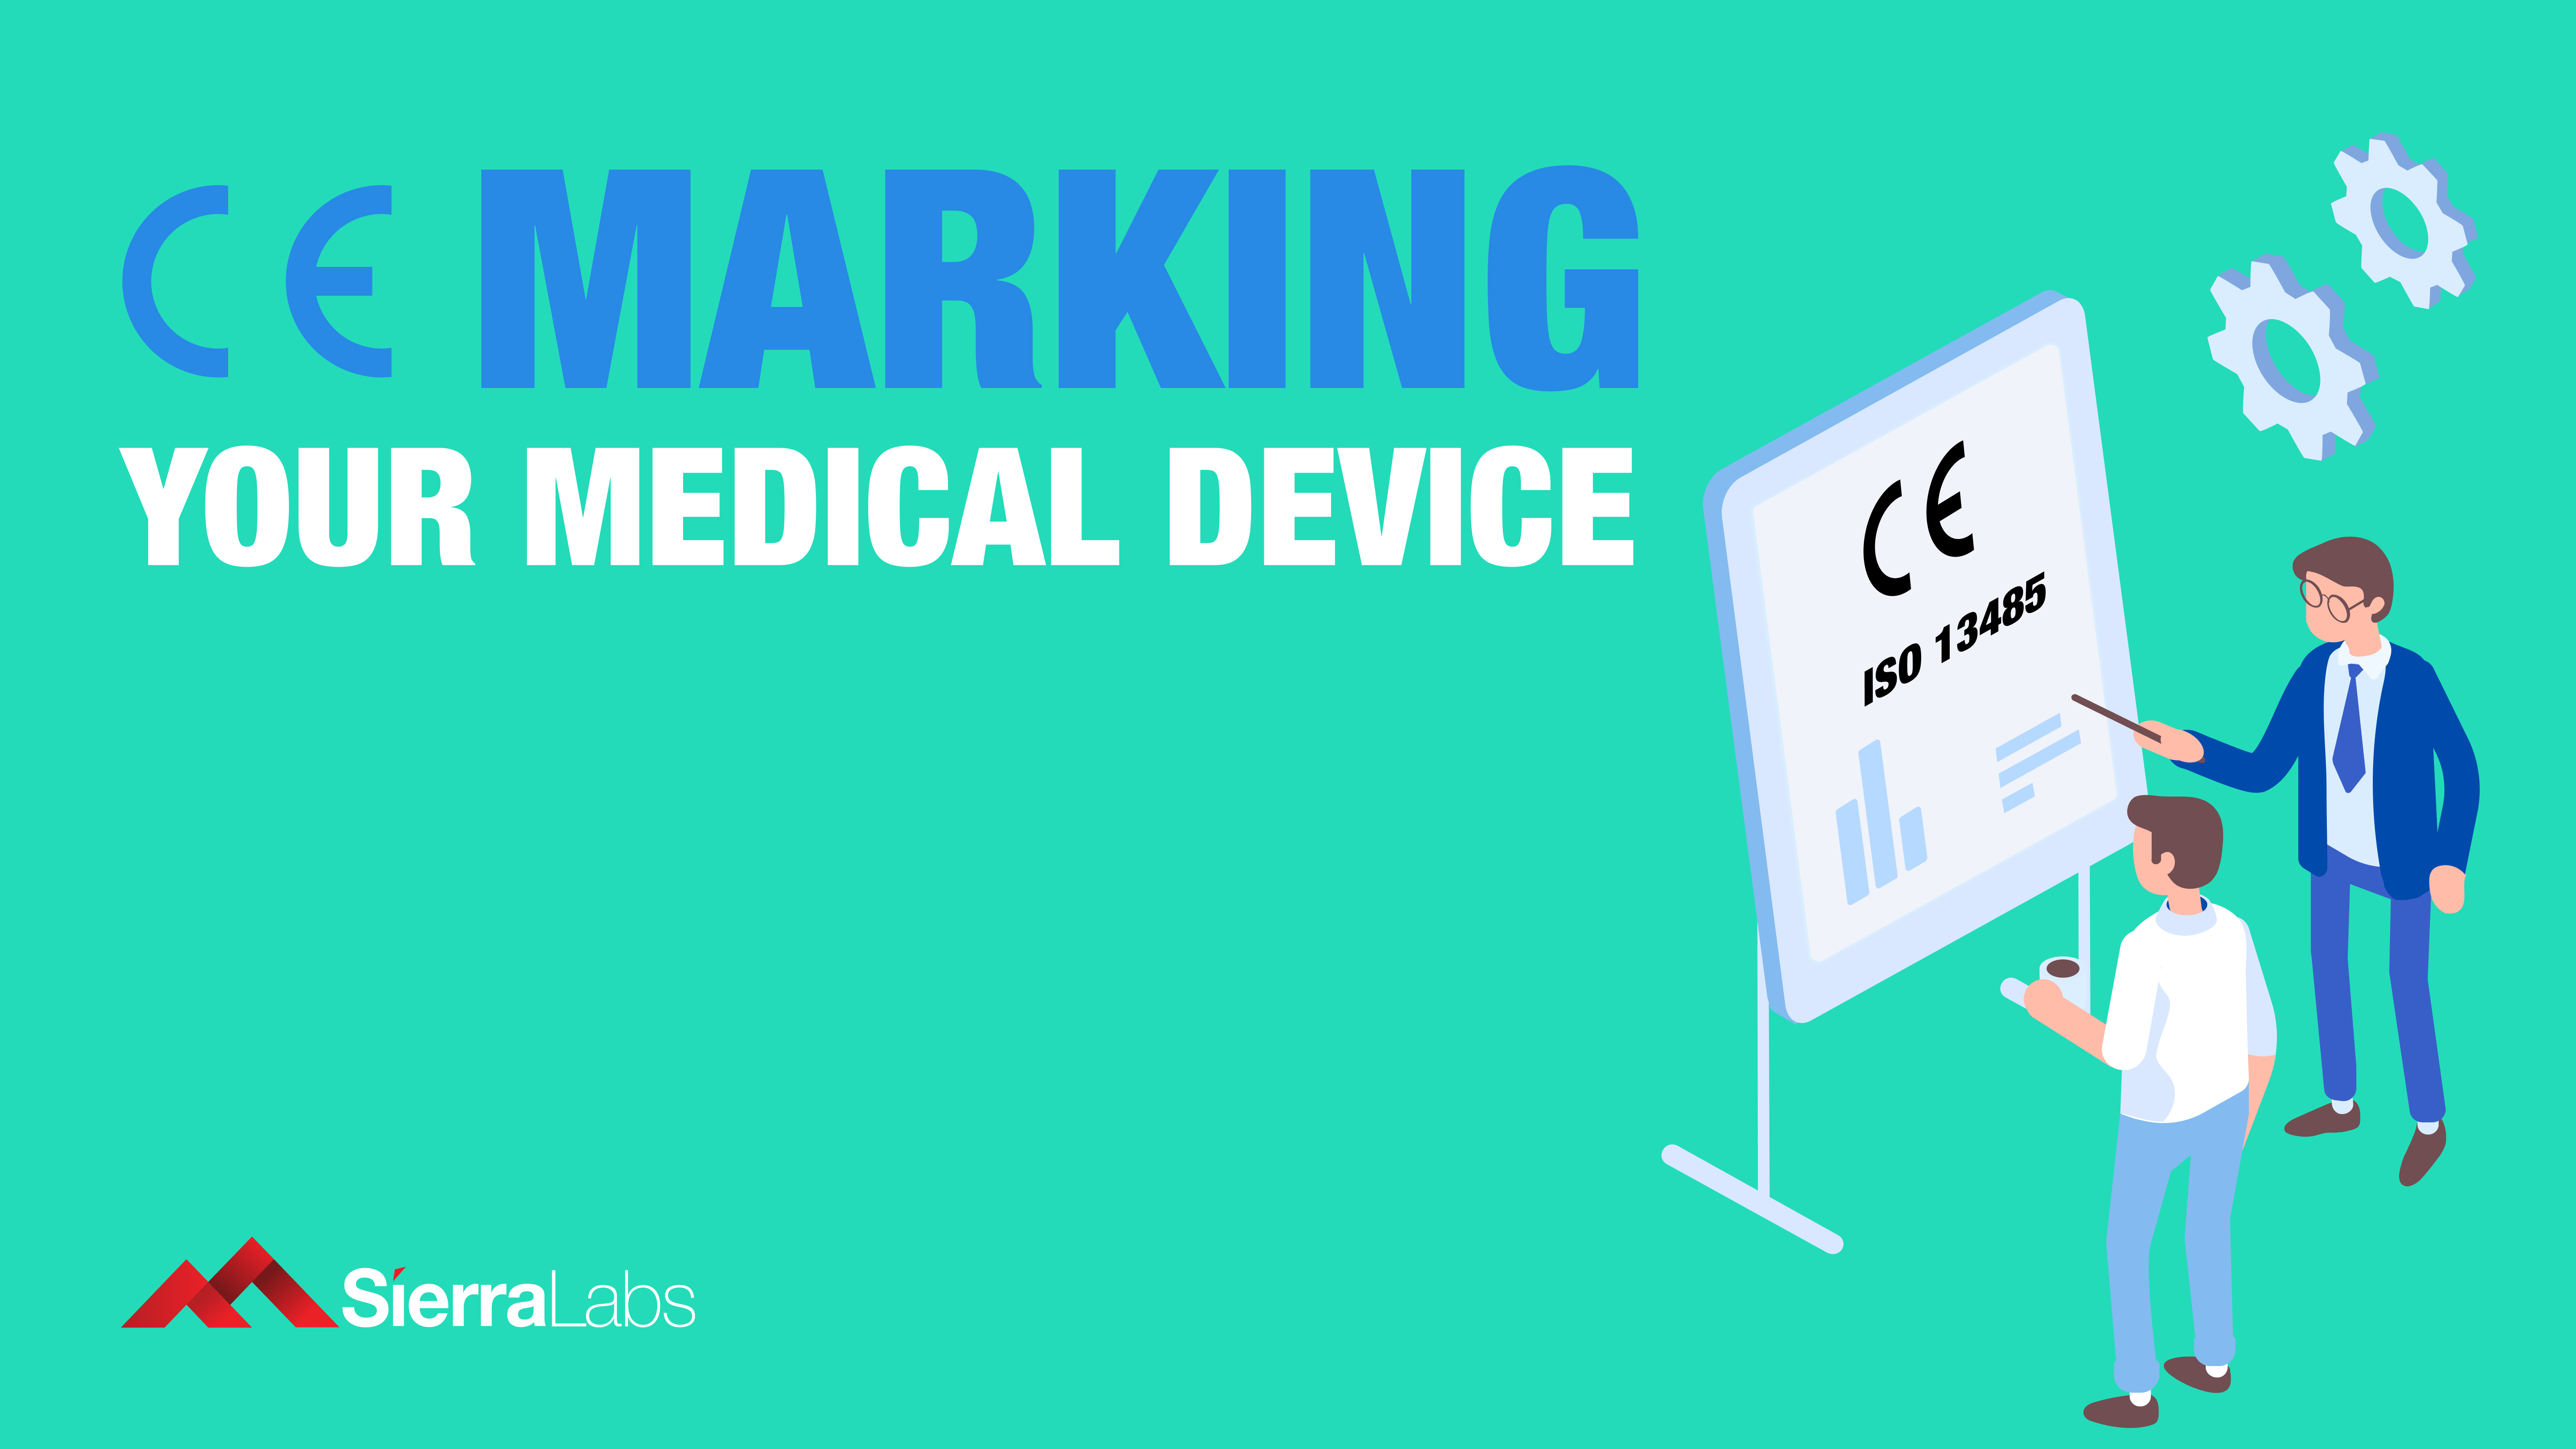 CE Marking Your Medical Device